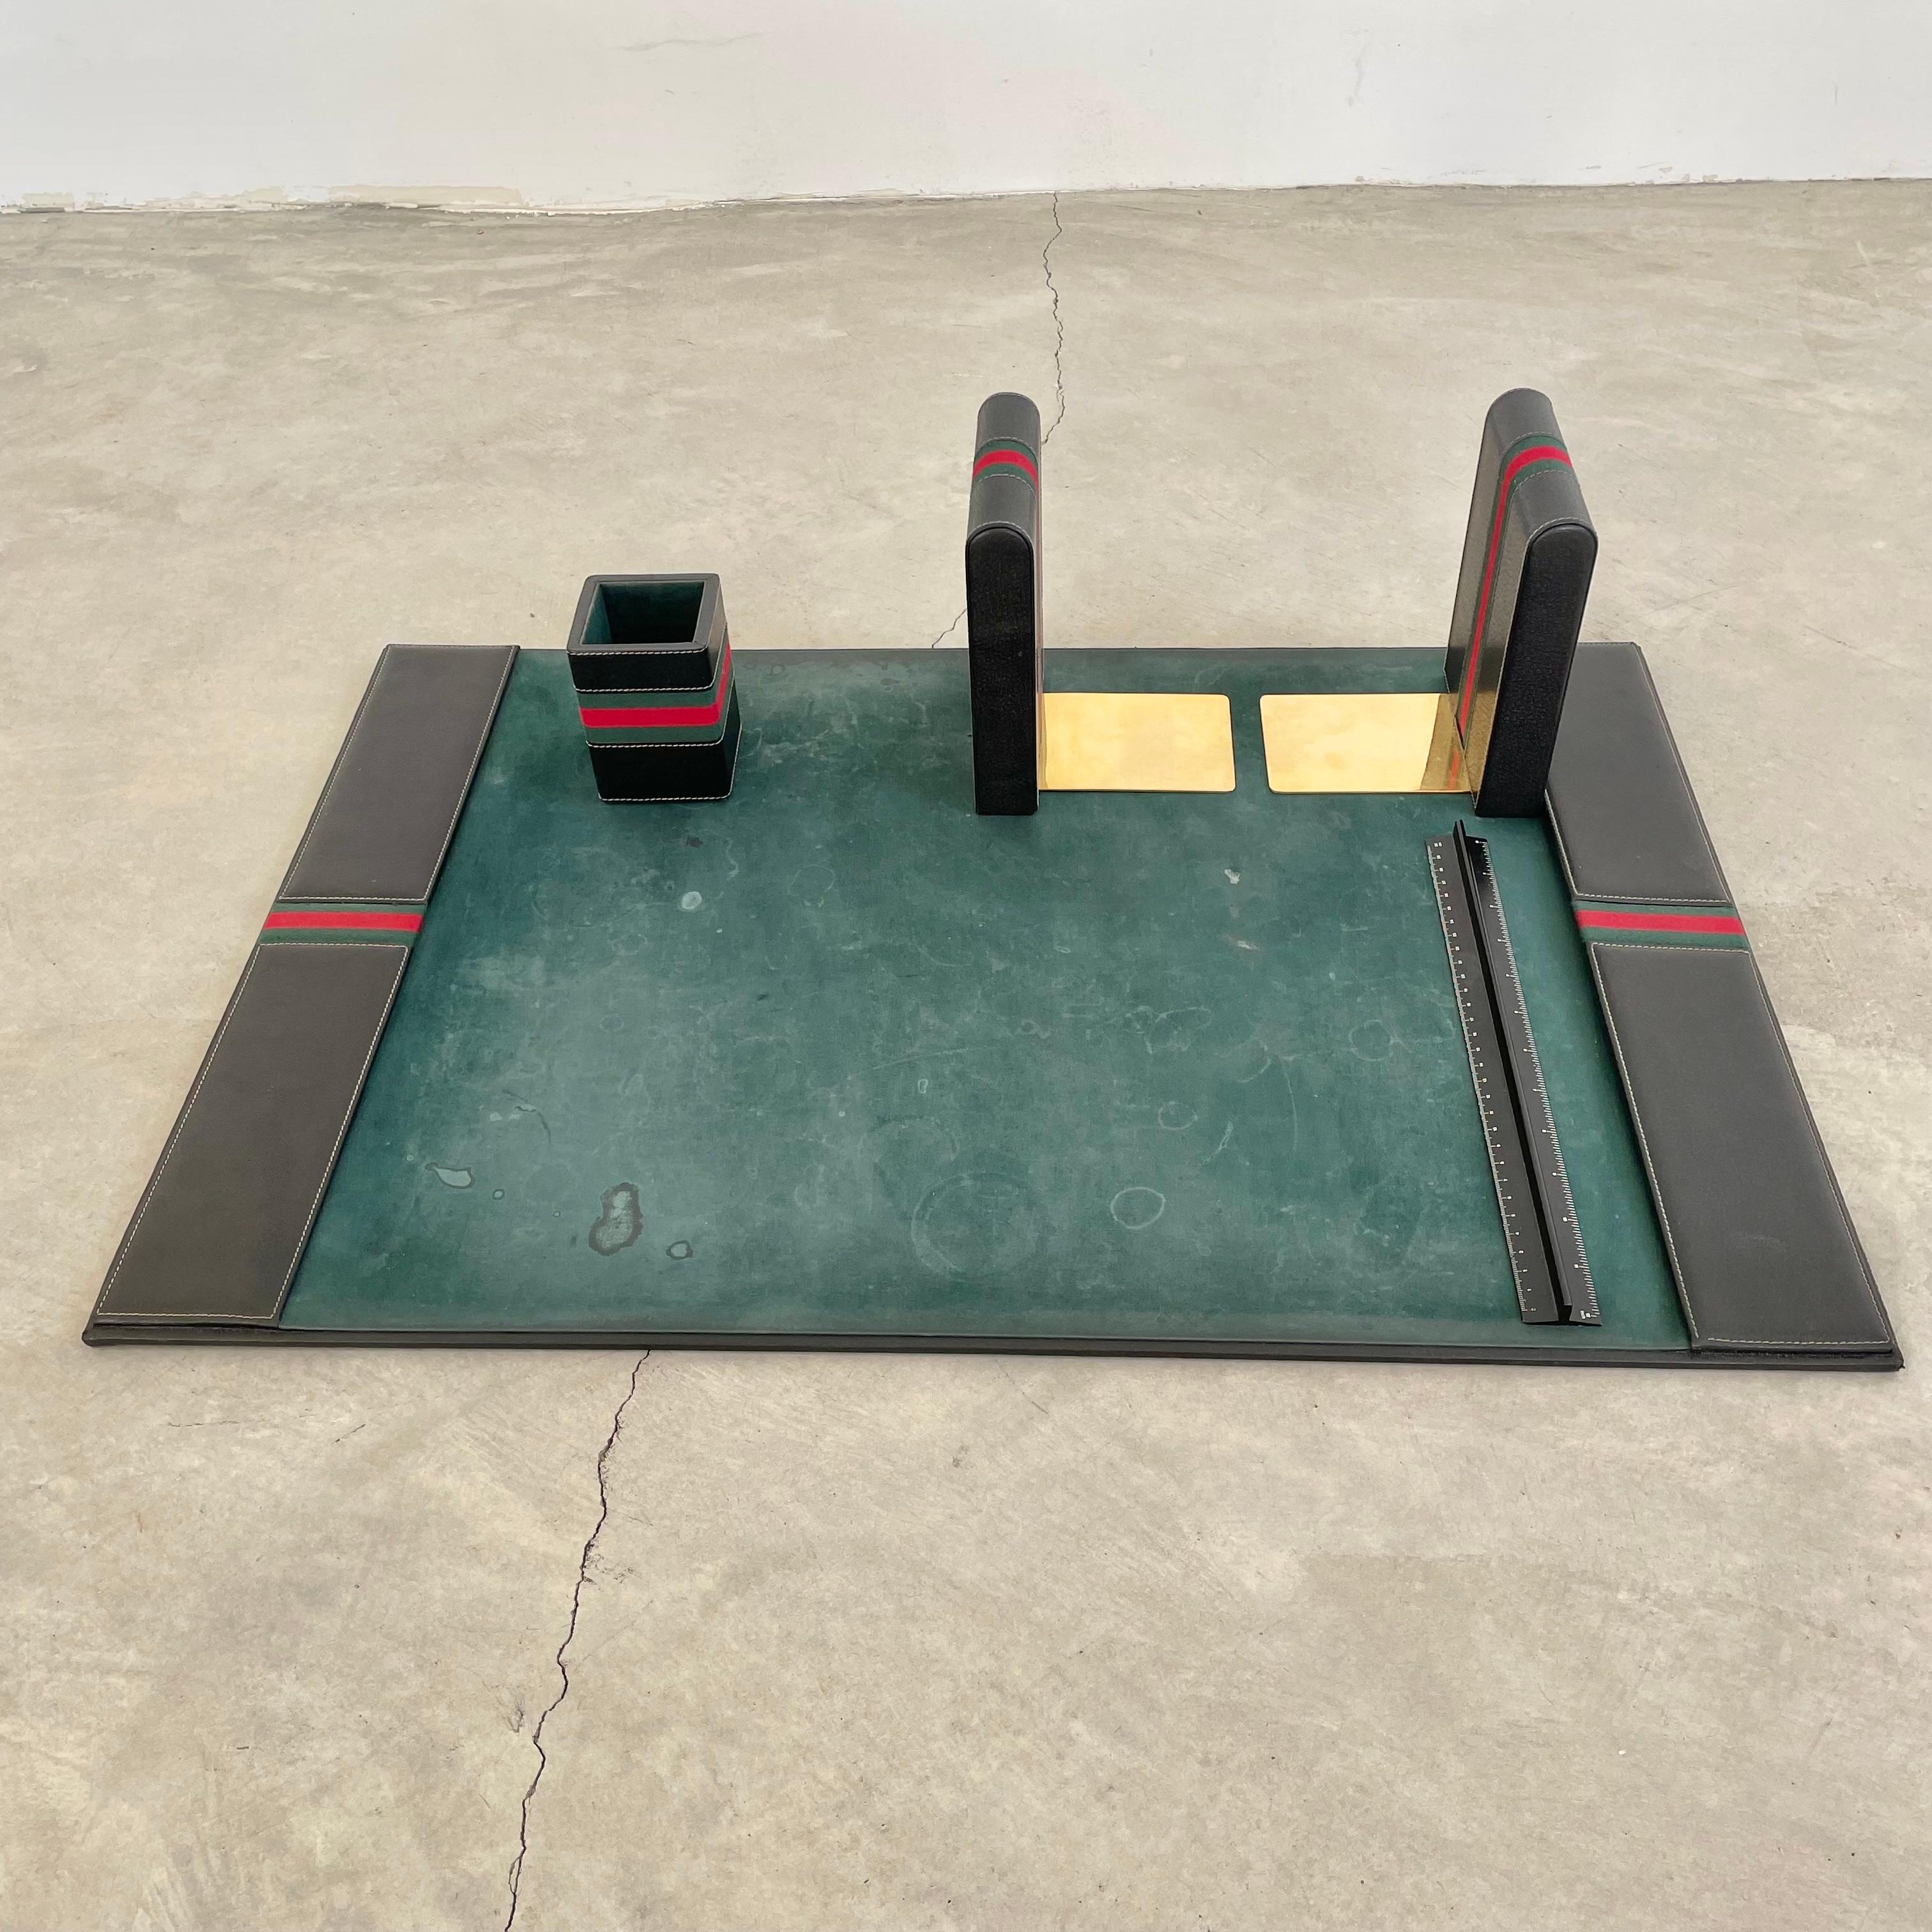 Beautiful Gucci desk set made of Black leather and emerald green velvet. Five pieces include: 2 Stunning leather and brass bookends, a pen holder, steel ruler in black and a large desk pad. Each piece is wrapped in the iconic red and green stripe